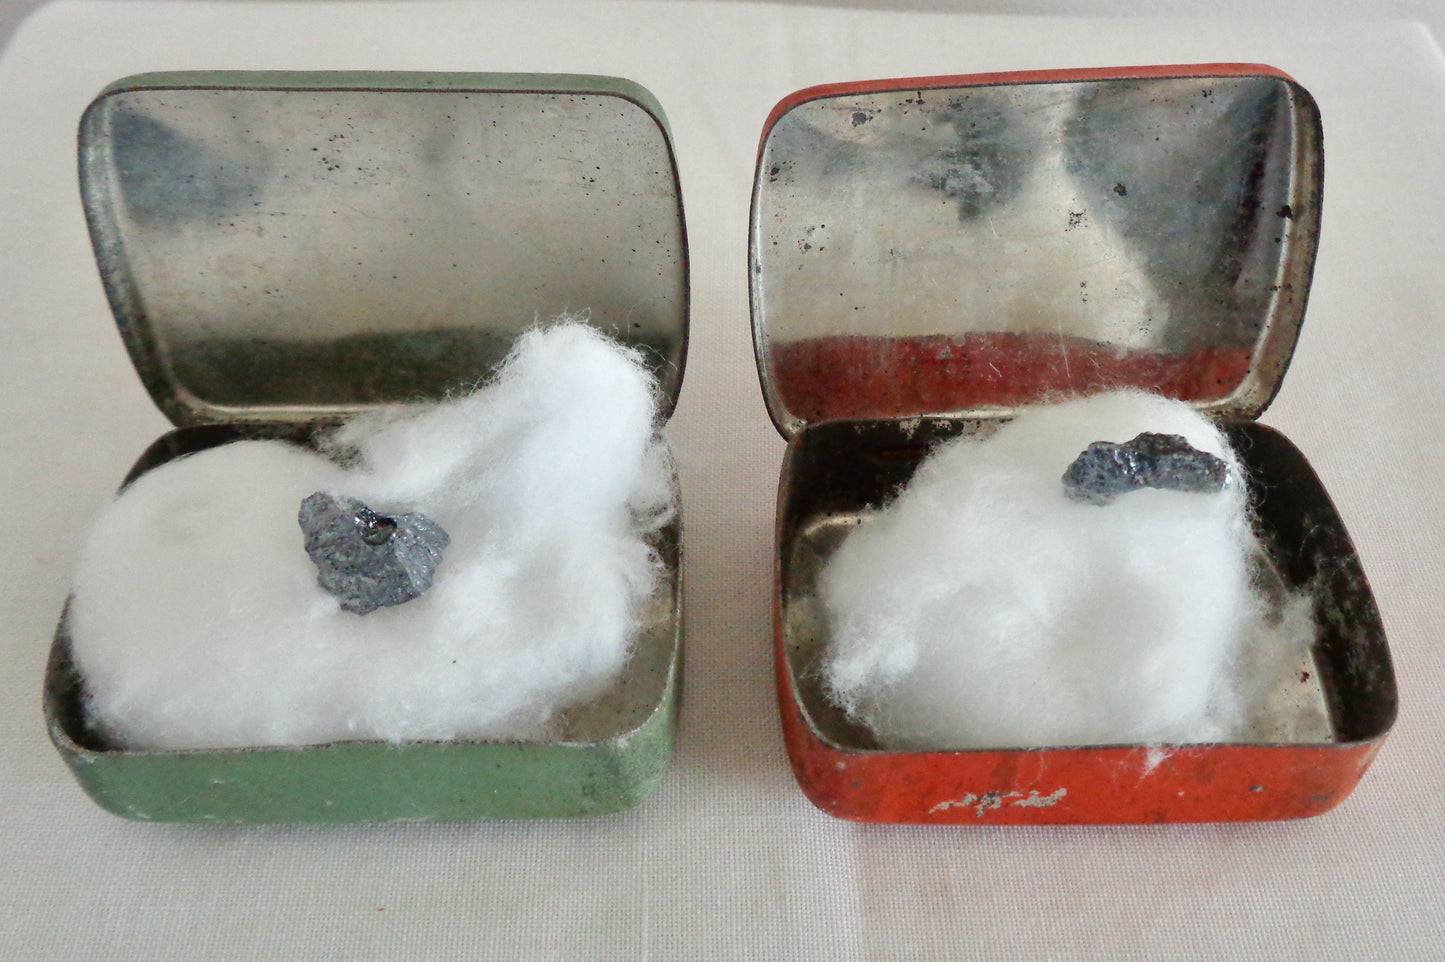 Pair of 1920s Herzite/Cymosite Radio Detector Crystal Tins With Crystals